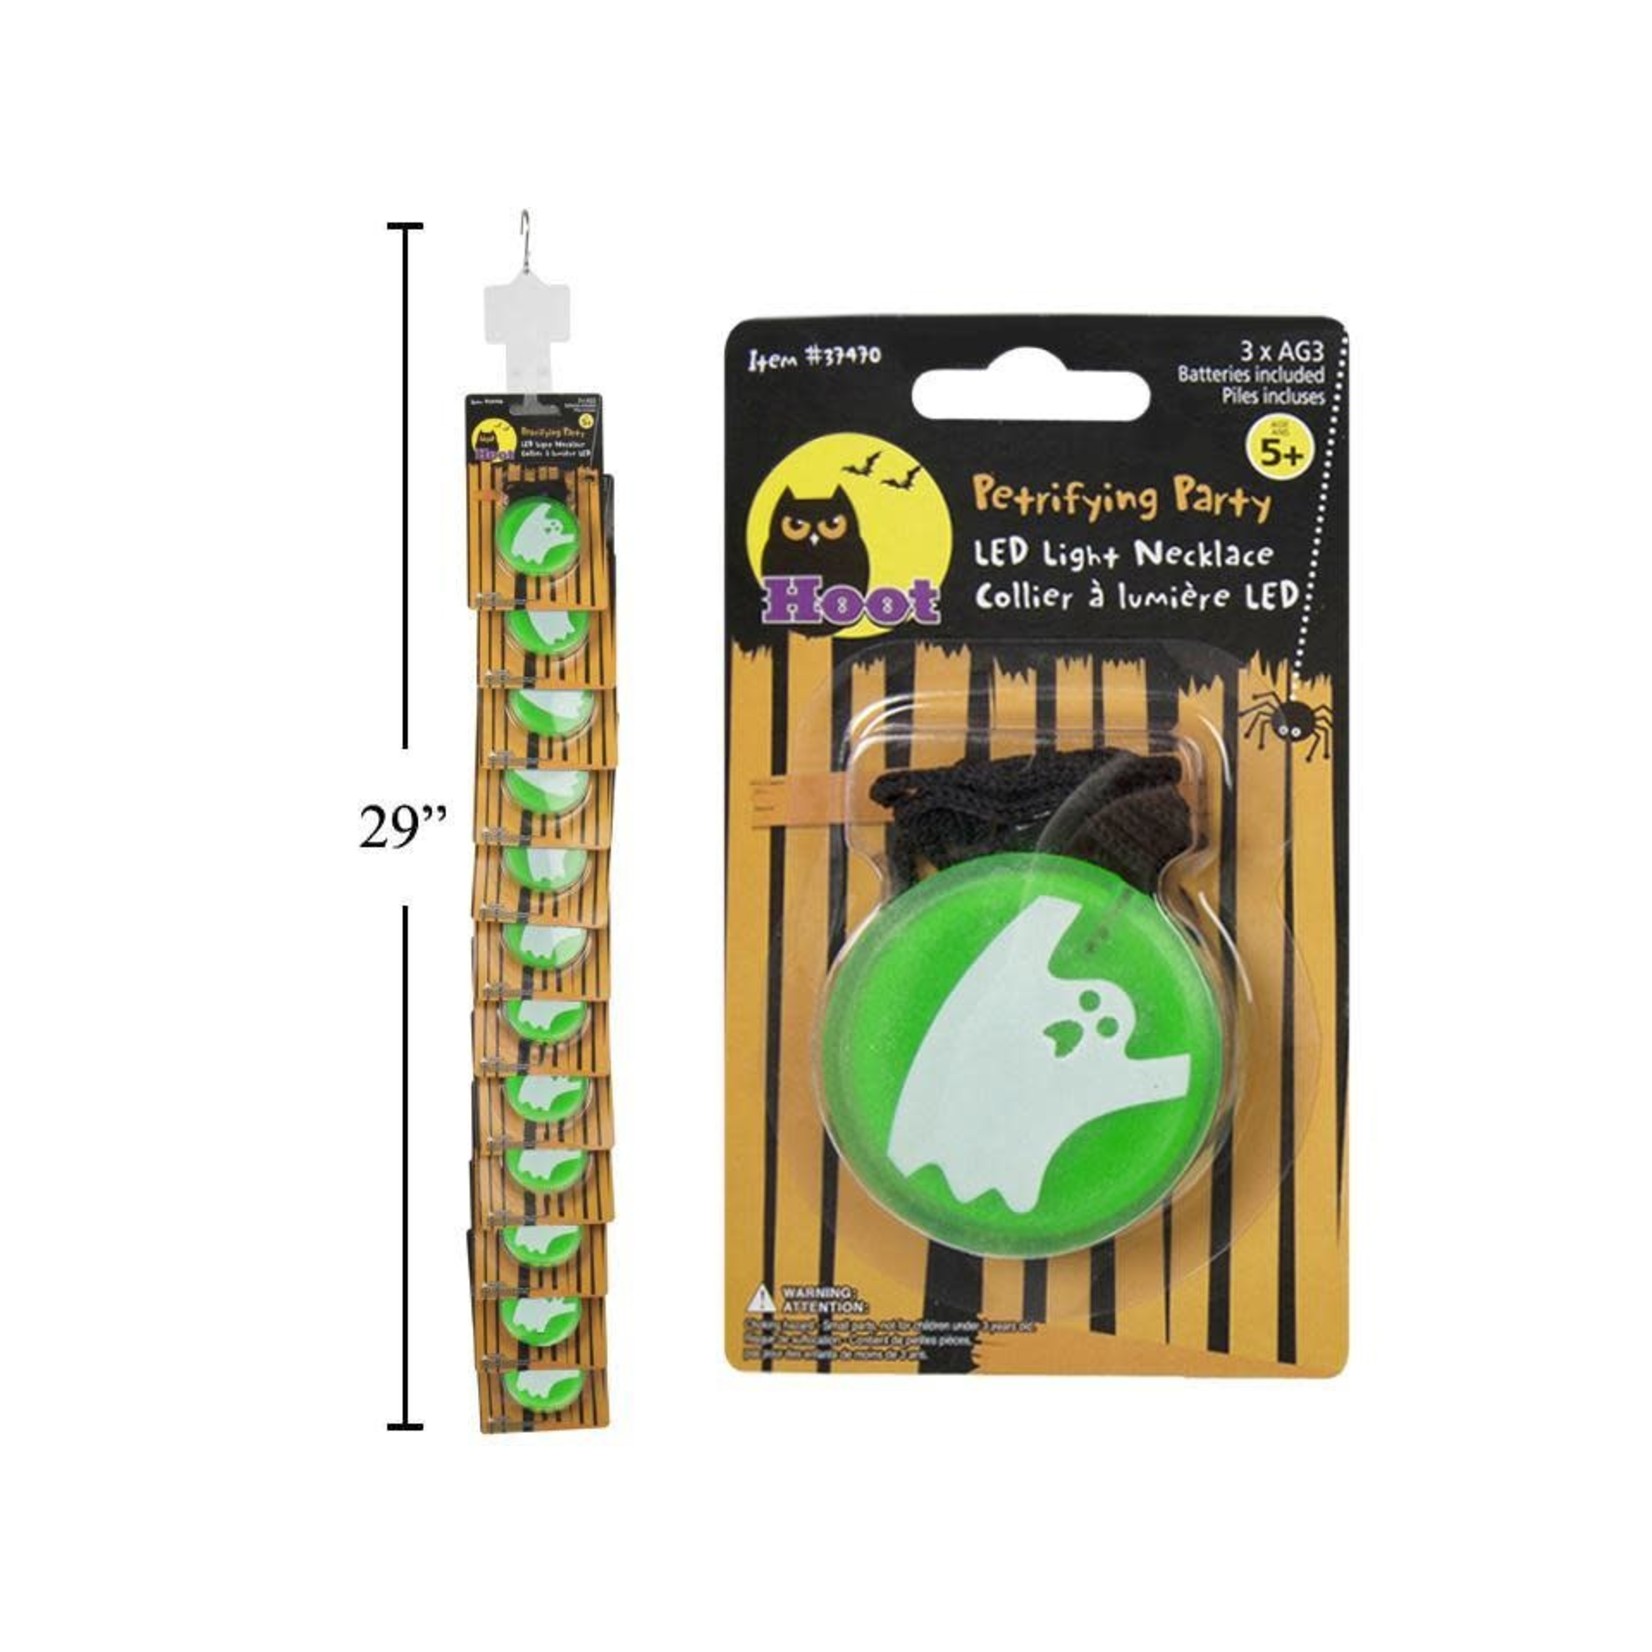 LED SAFETY NECKLACE HALLOWEEN